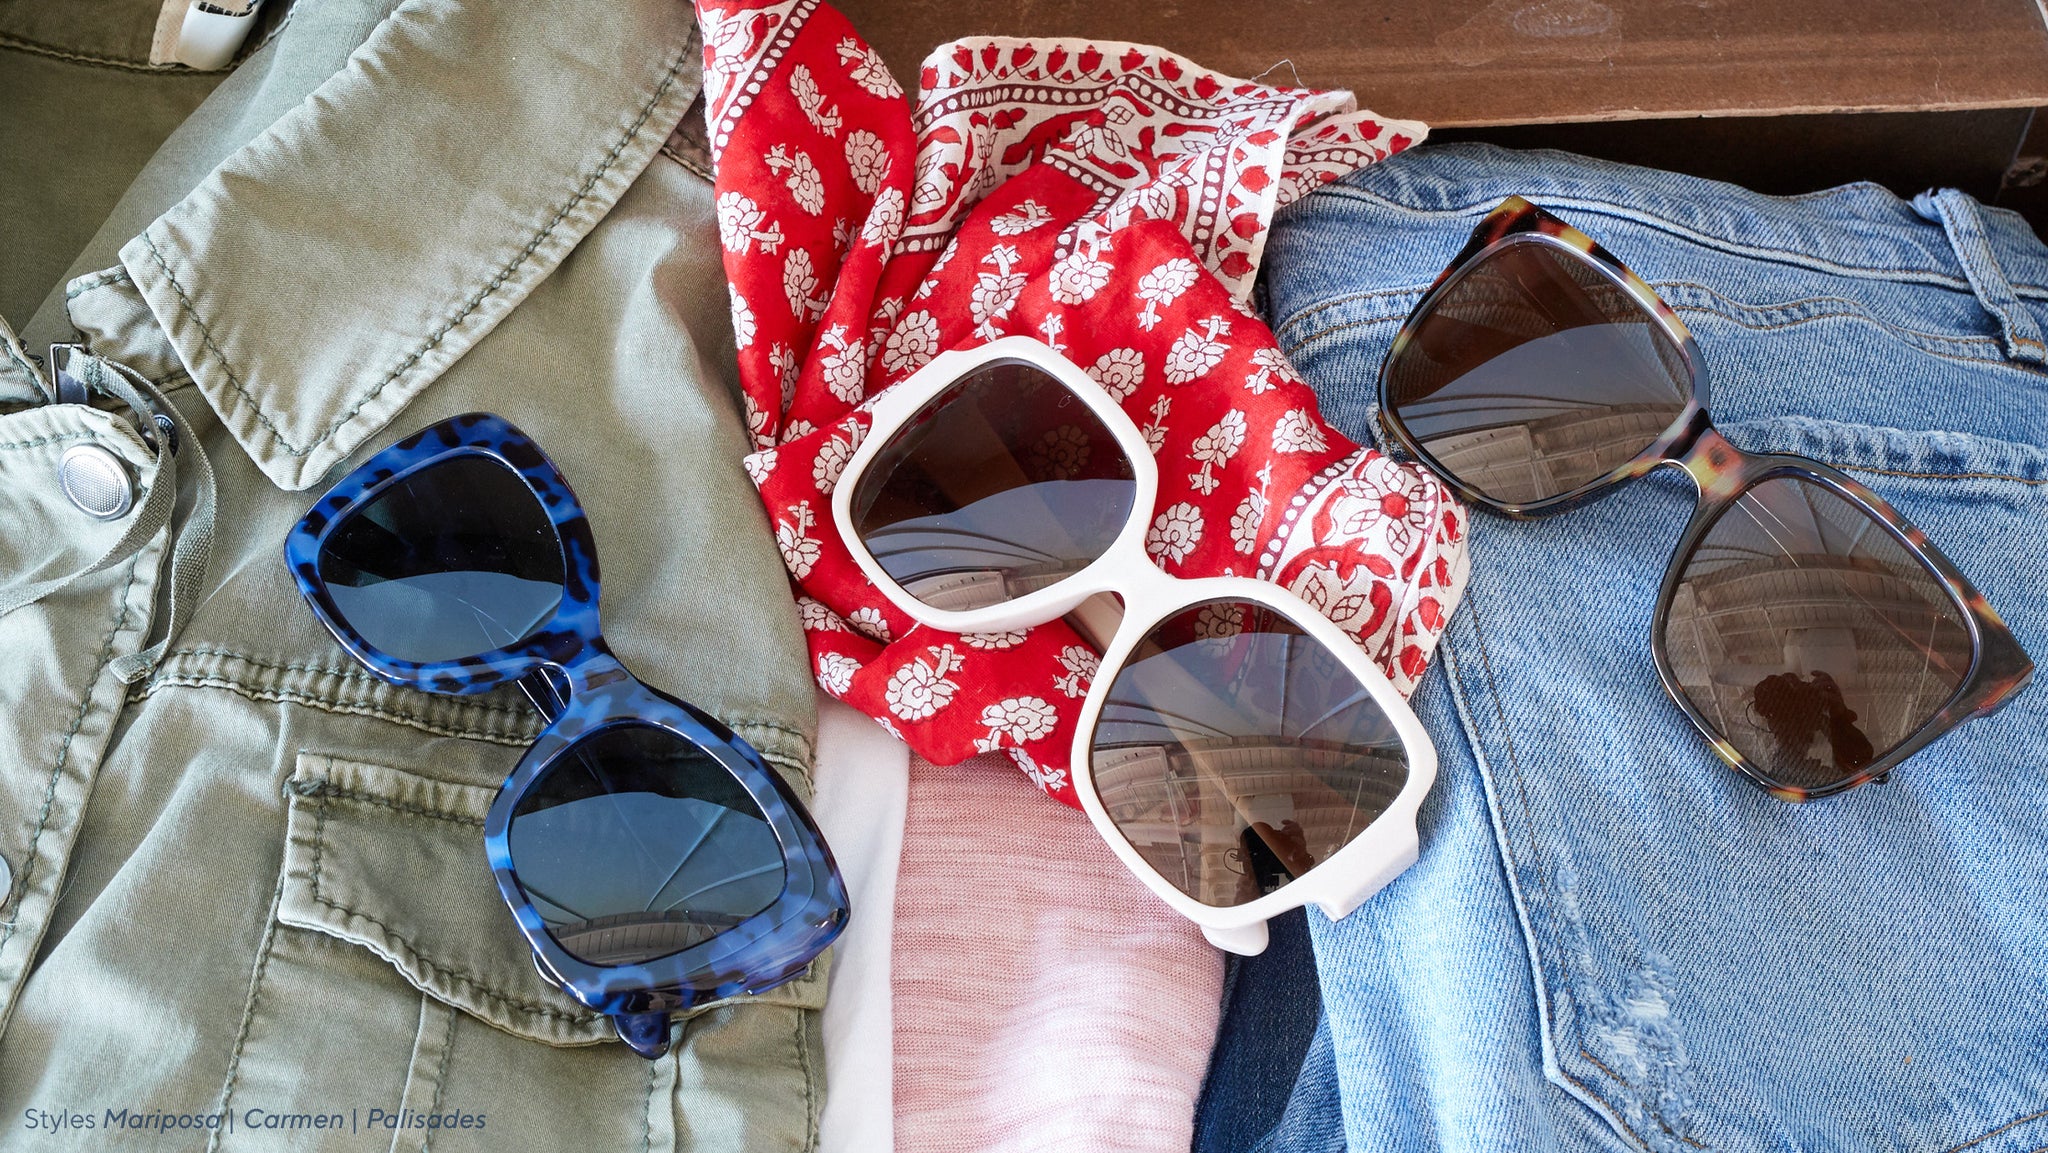 Peepers sunglasses styled on clothes packed in a suitcase